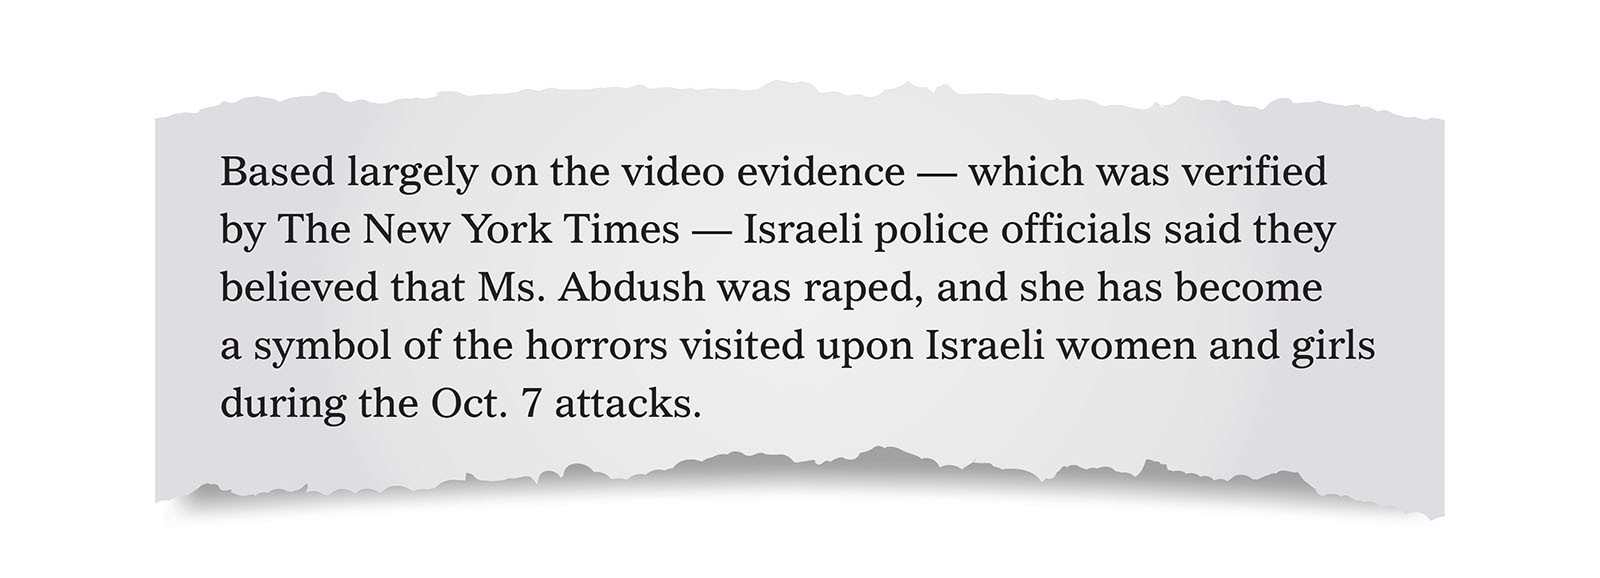 Pull quote:
Based largely on the video evidence — which was verified by The New York Times — Israeli police officials said they believed that Ms. Abdush was raped, and she has become a symbol of the horrors visited upon Israeli women and girls during the Oct. 7 attacks.